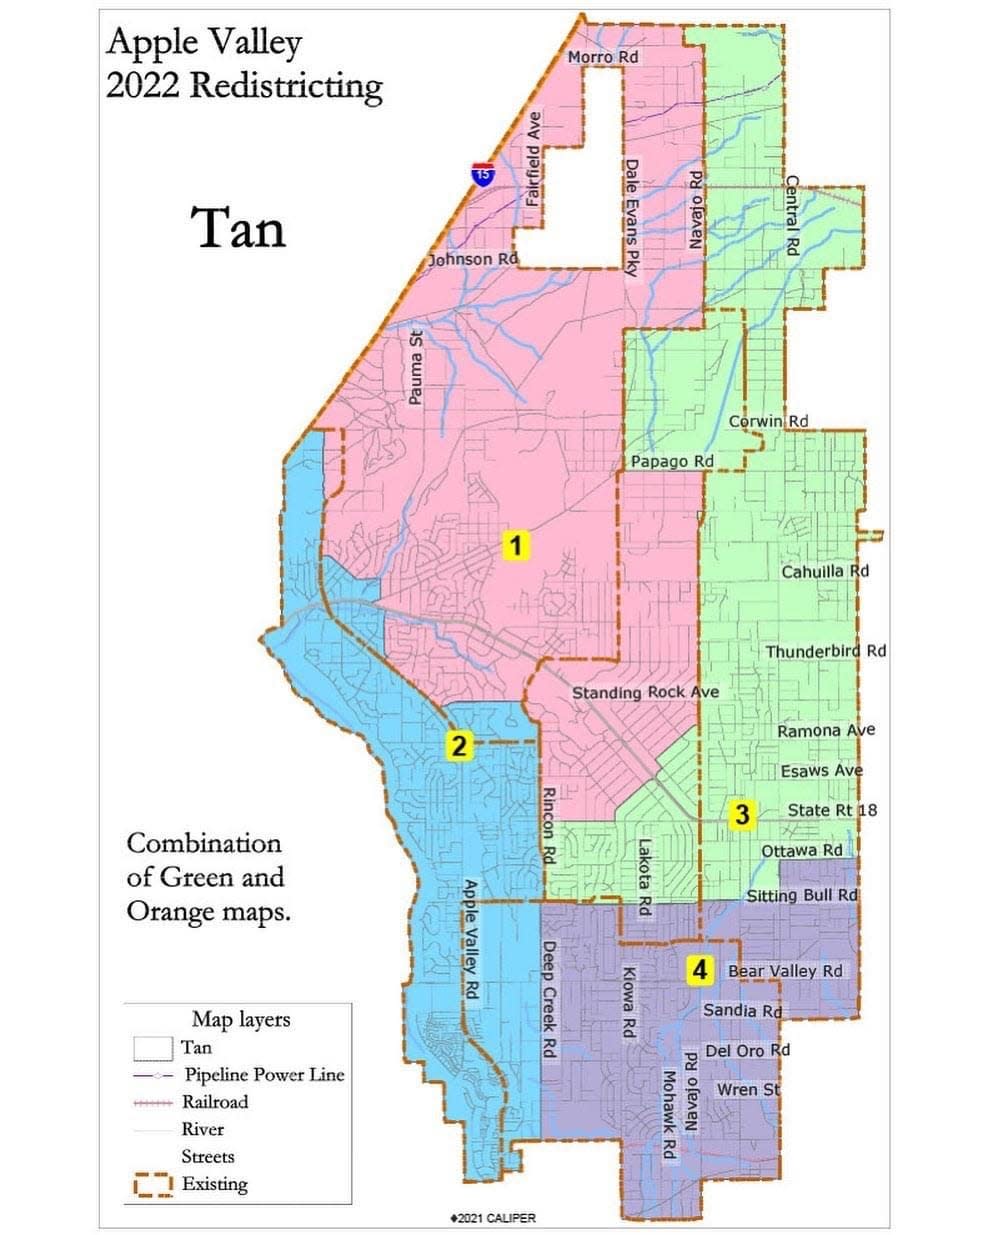 The Apple Valley Town Council on Tuesday adopted a final redistricting map, which will take effect during the November election.